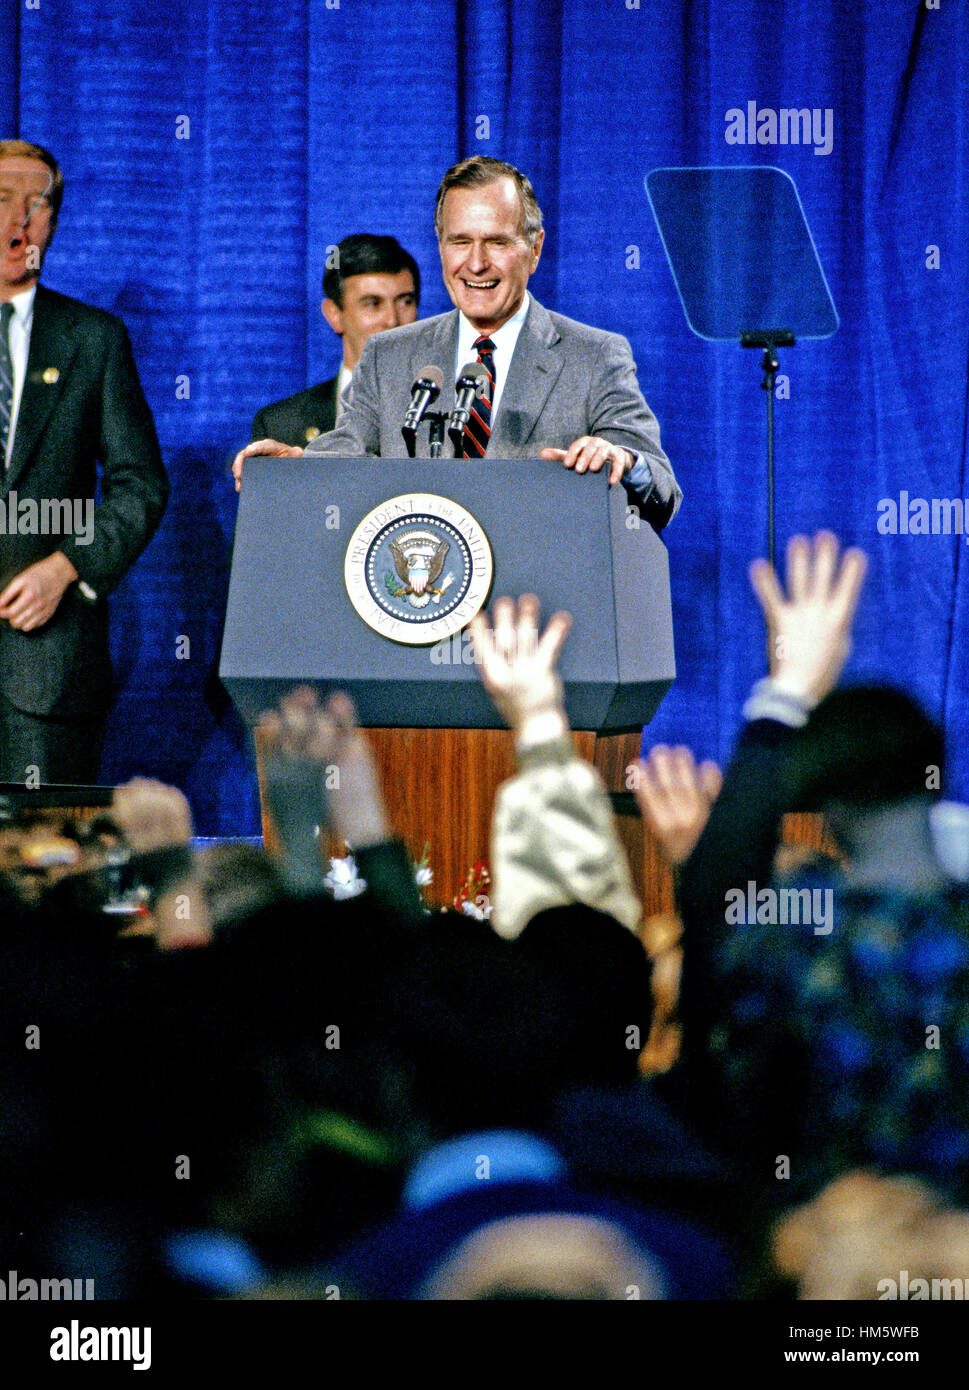 United States President George H.W. Bush campaigns for reelection at the Pinkerton Academy in Manchester, New Hampshire on February 16, 1992 prior to the 1992 New Hampshire Primary. Stock Photo